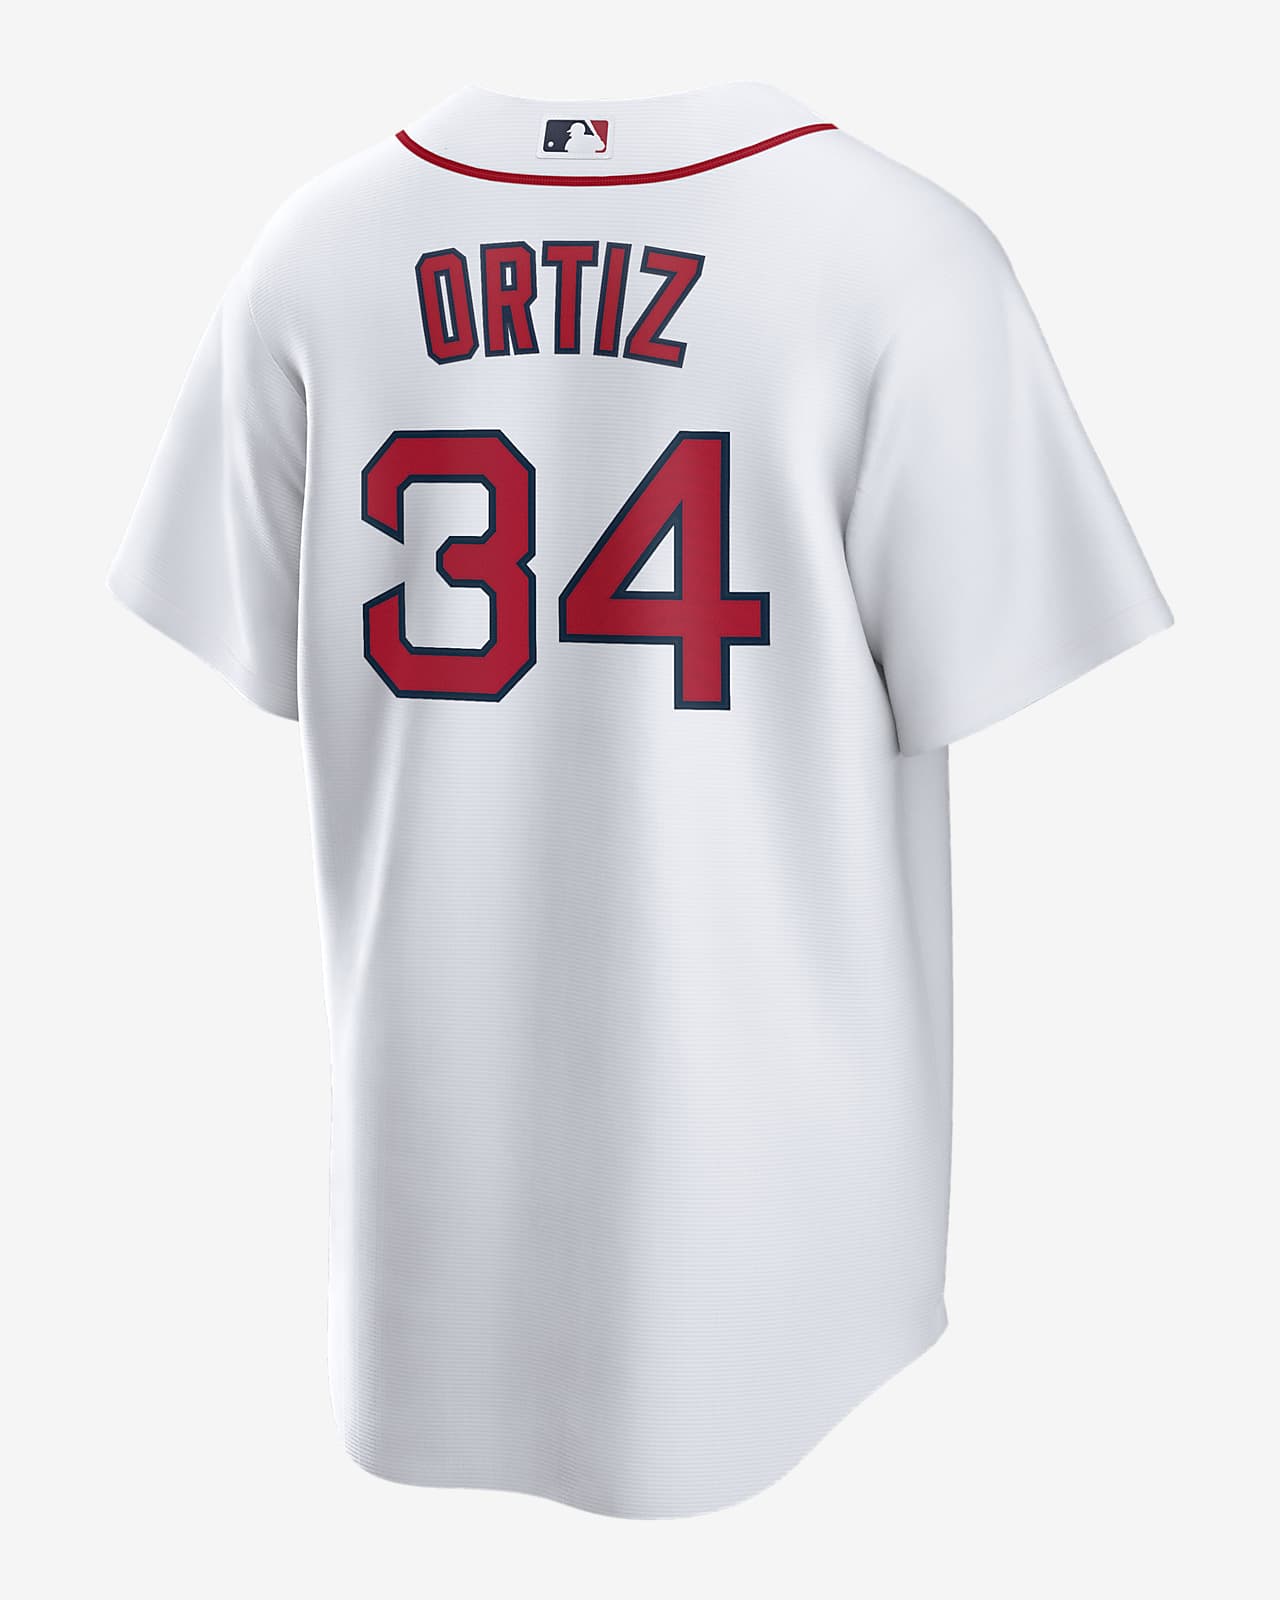 Boston Red Sox MLB Official Alternate Replica Jersey